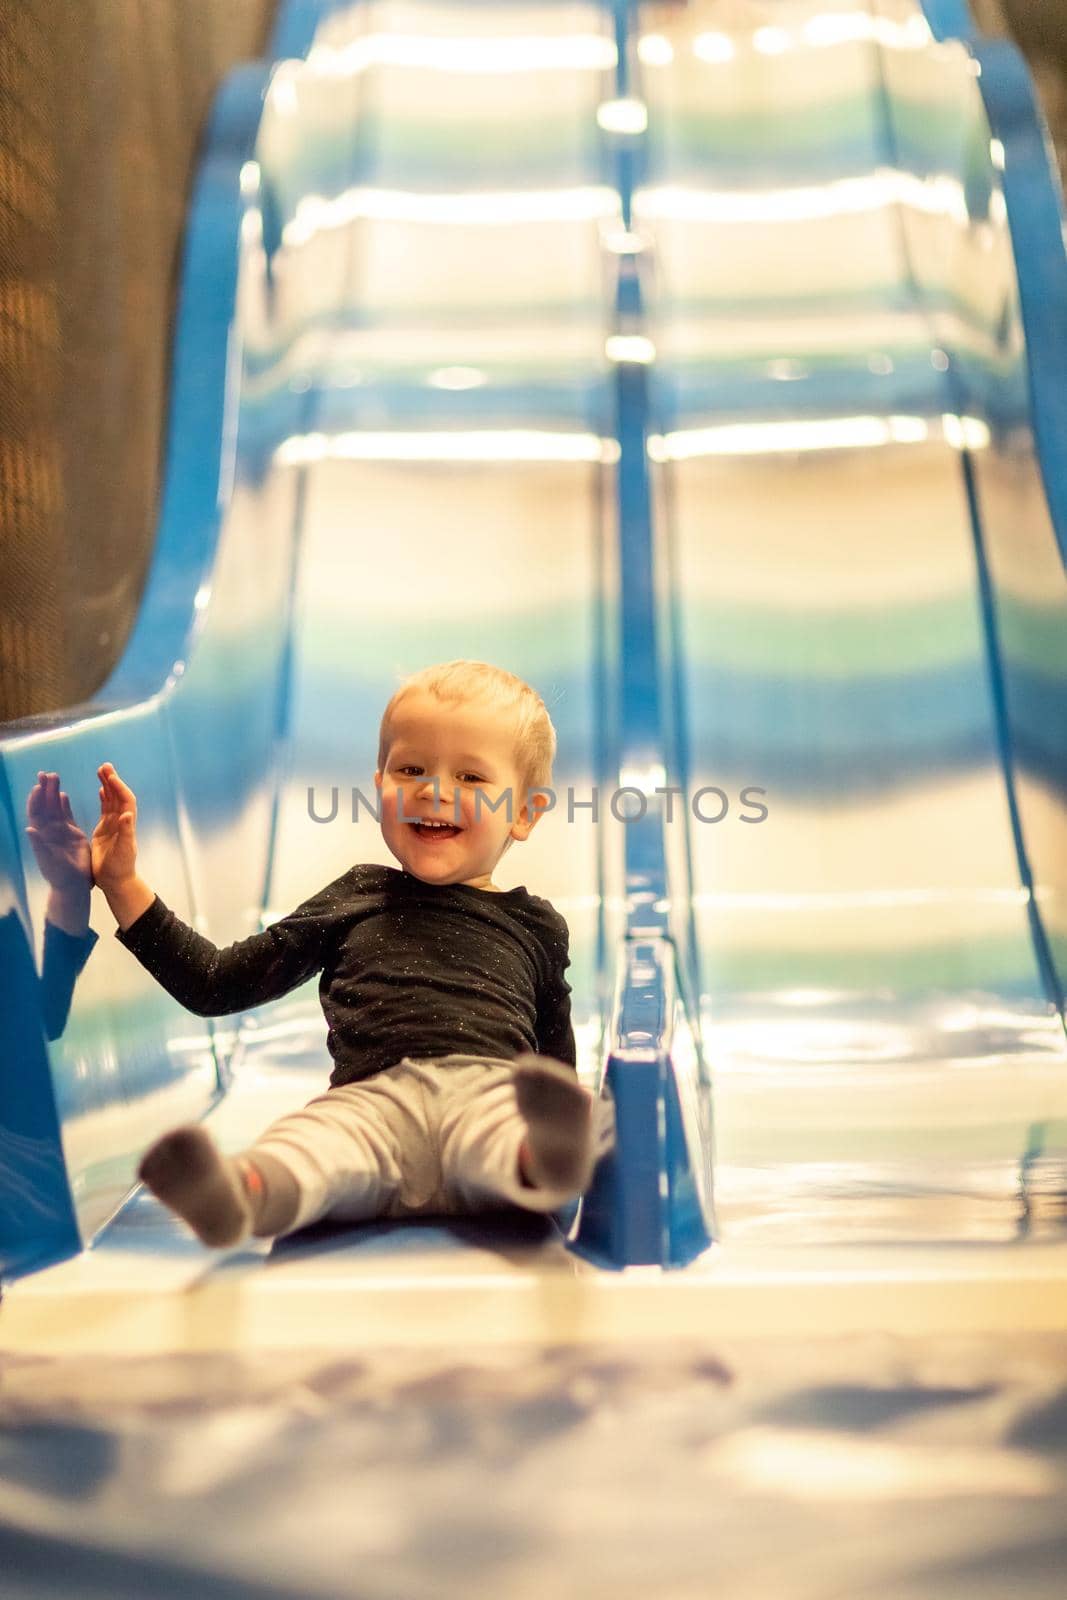 Kid riding from childrens slides in game center by Lincikas